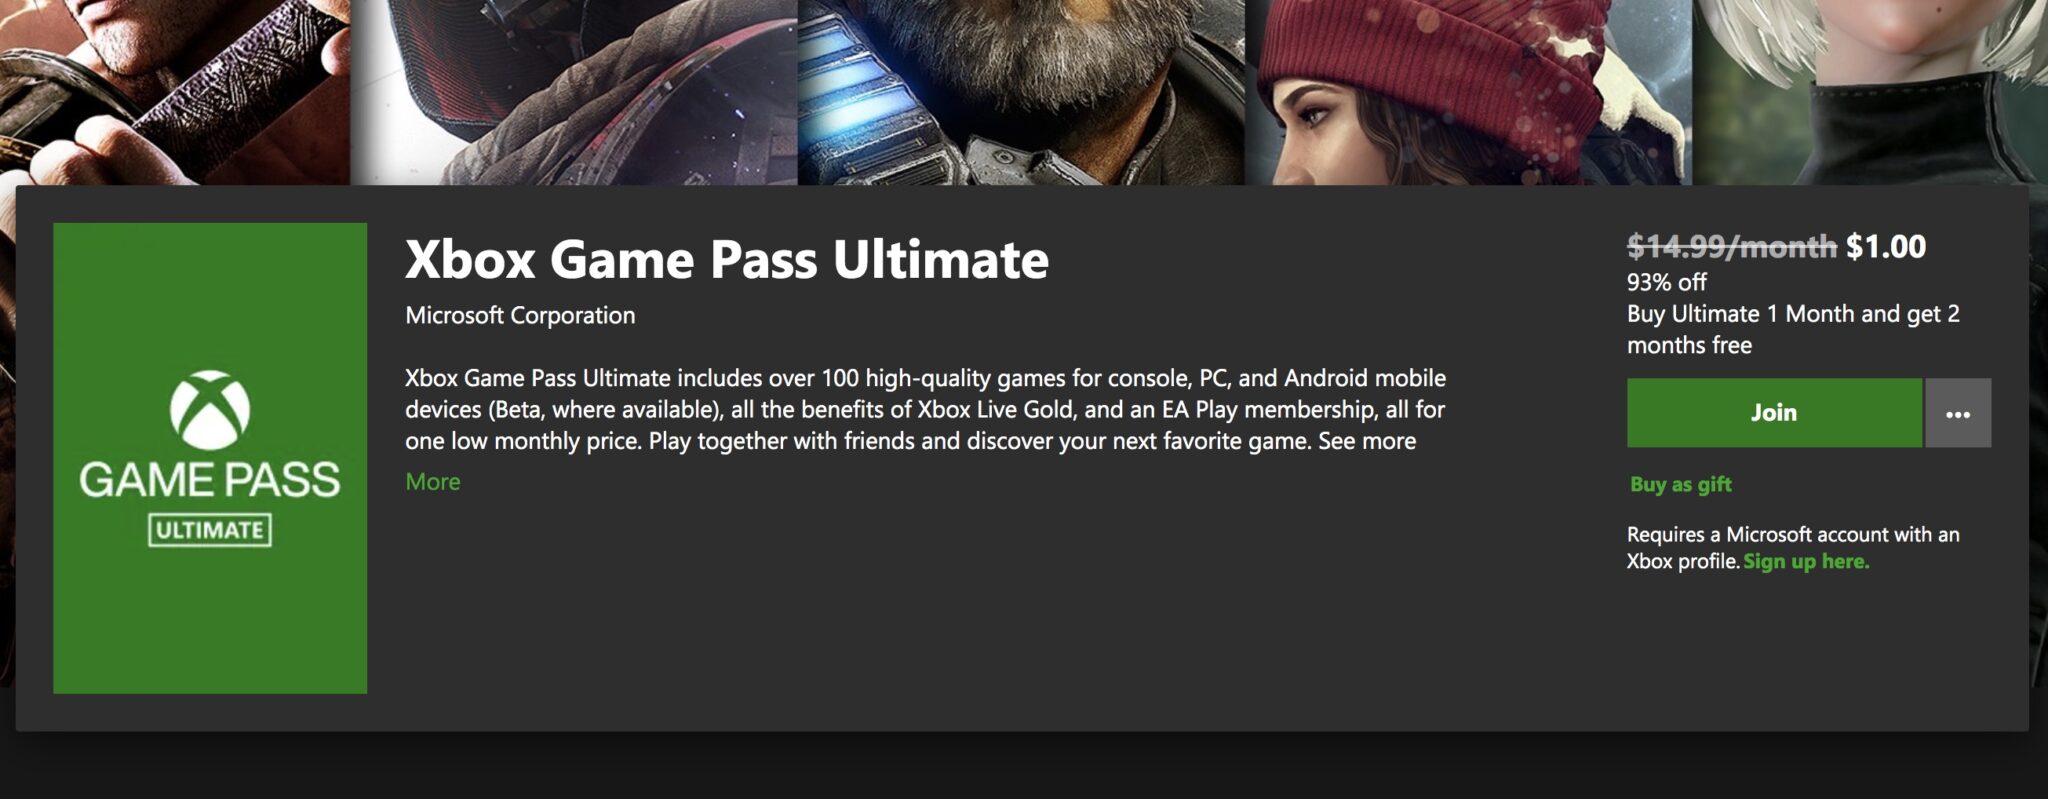 difference between game pass and ultimate